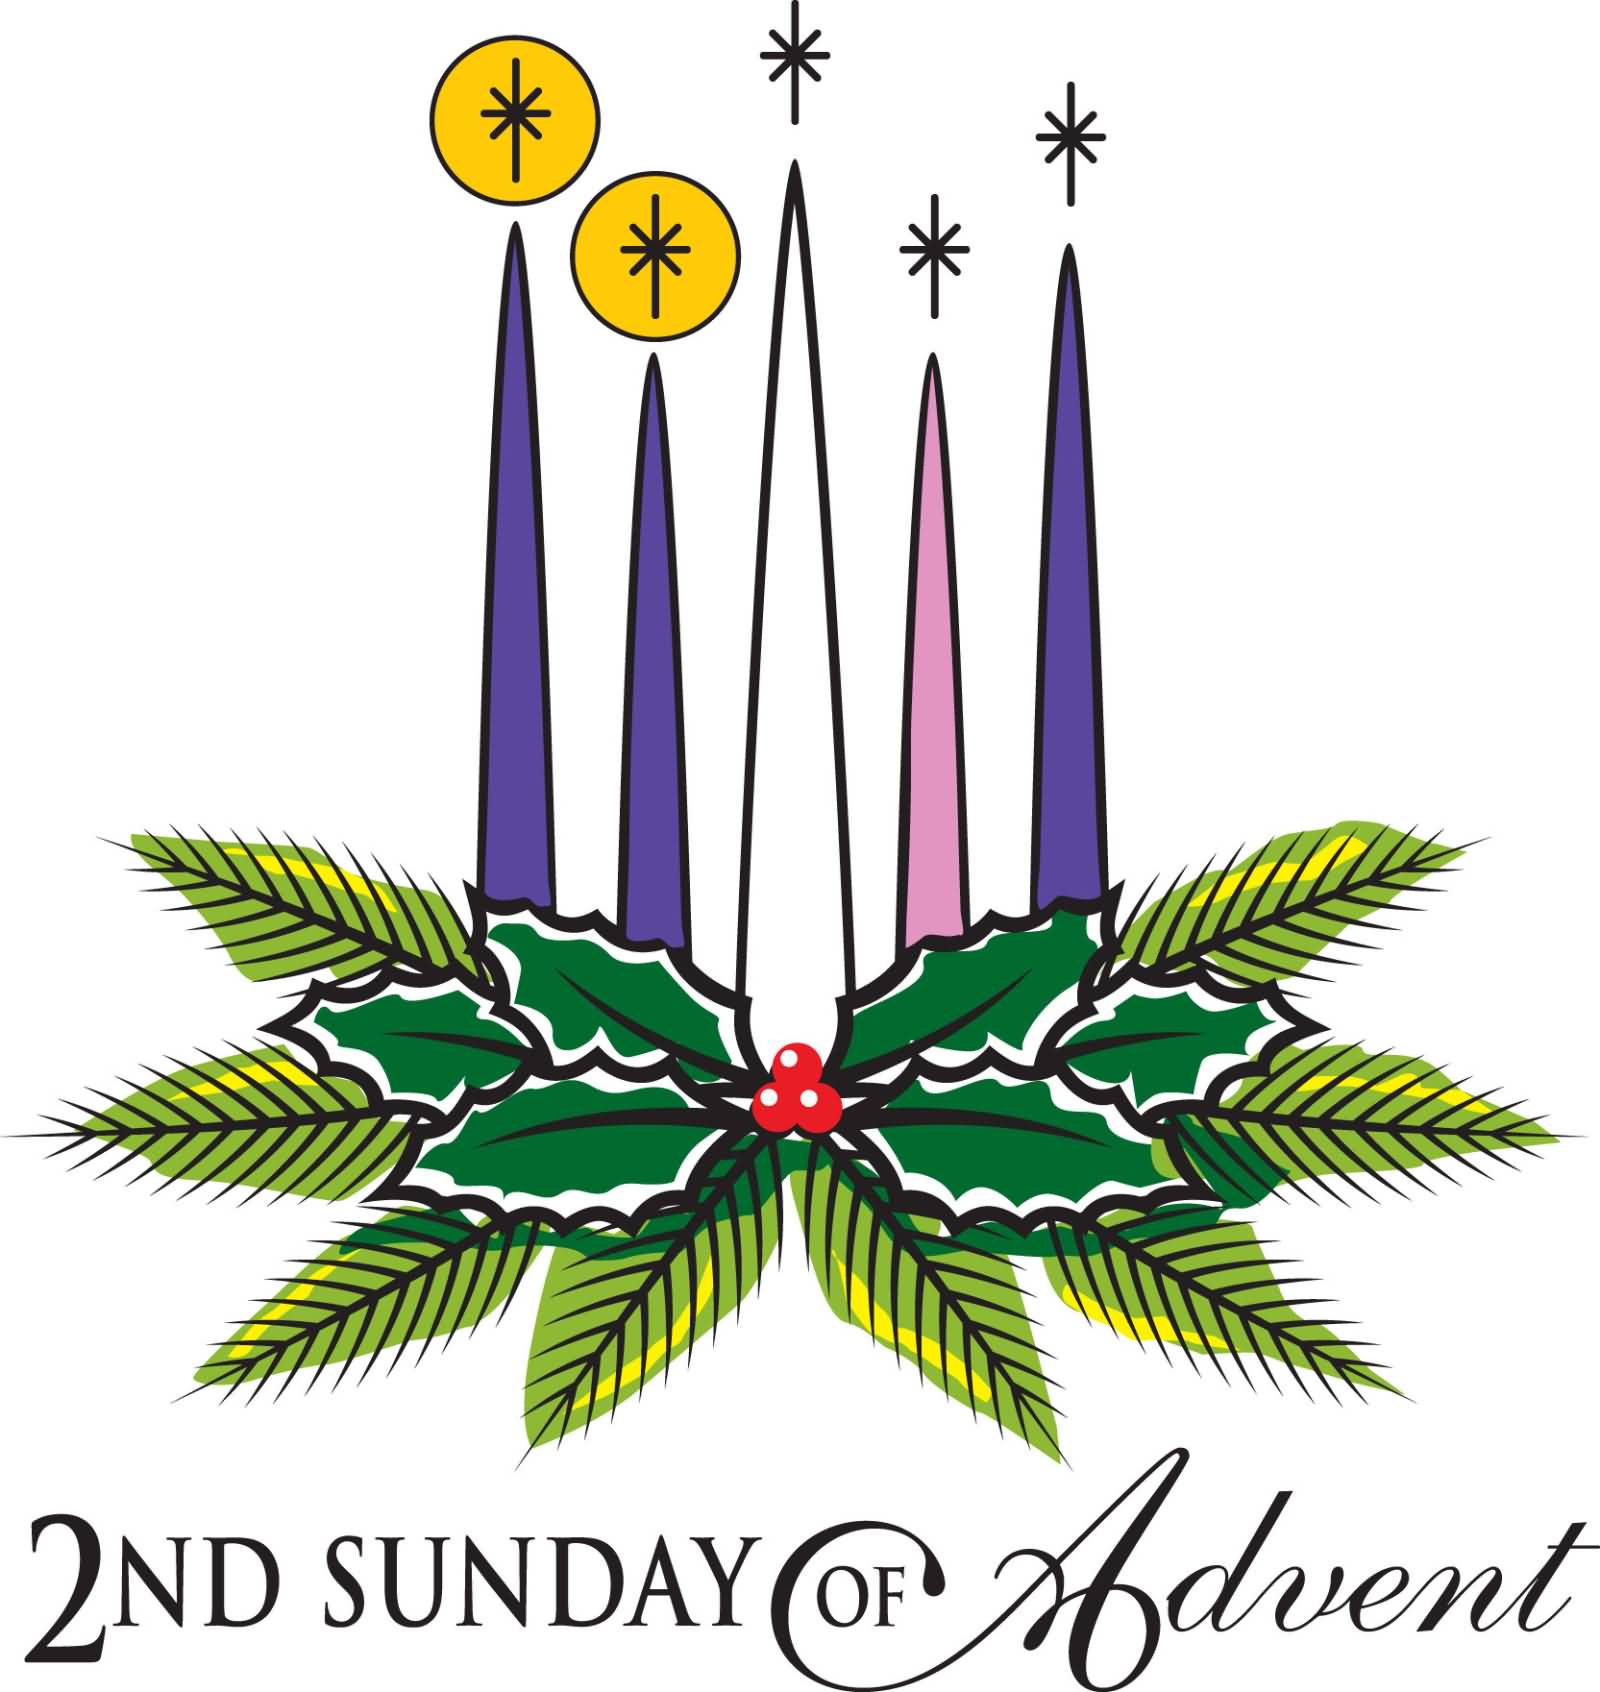 advent wreath clipart black and white - Clip Art Library